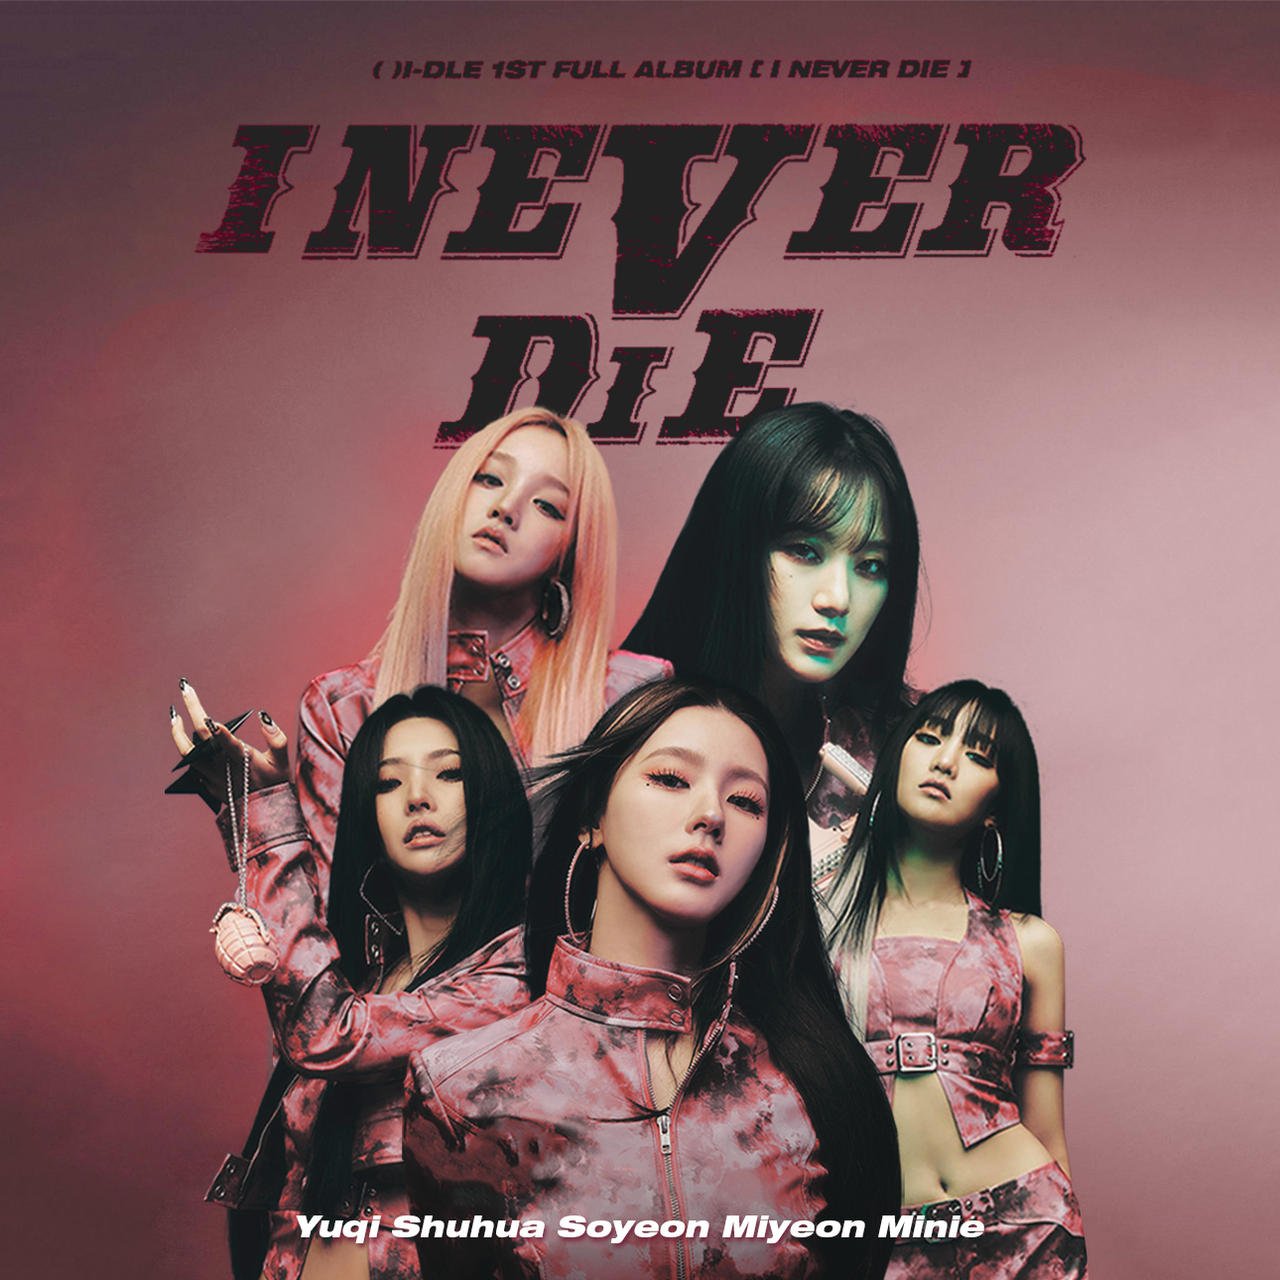 (G)I-DLE 'I NEVER DIE' selected as 'The Best K-POP Songs and Albums of 2022' by TIME Magazine